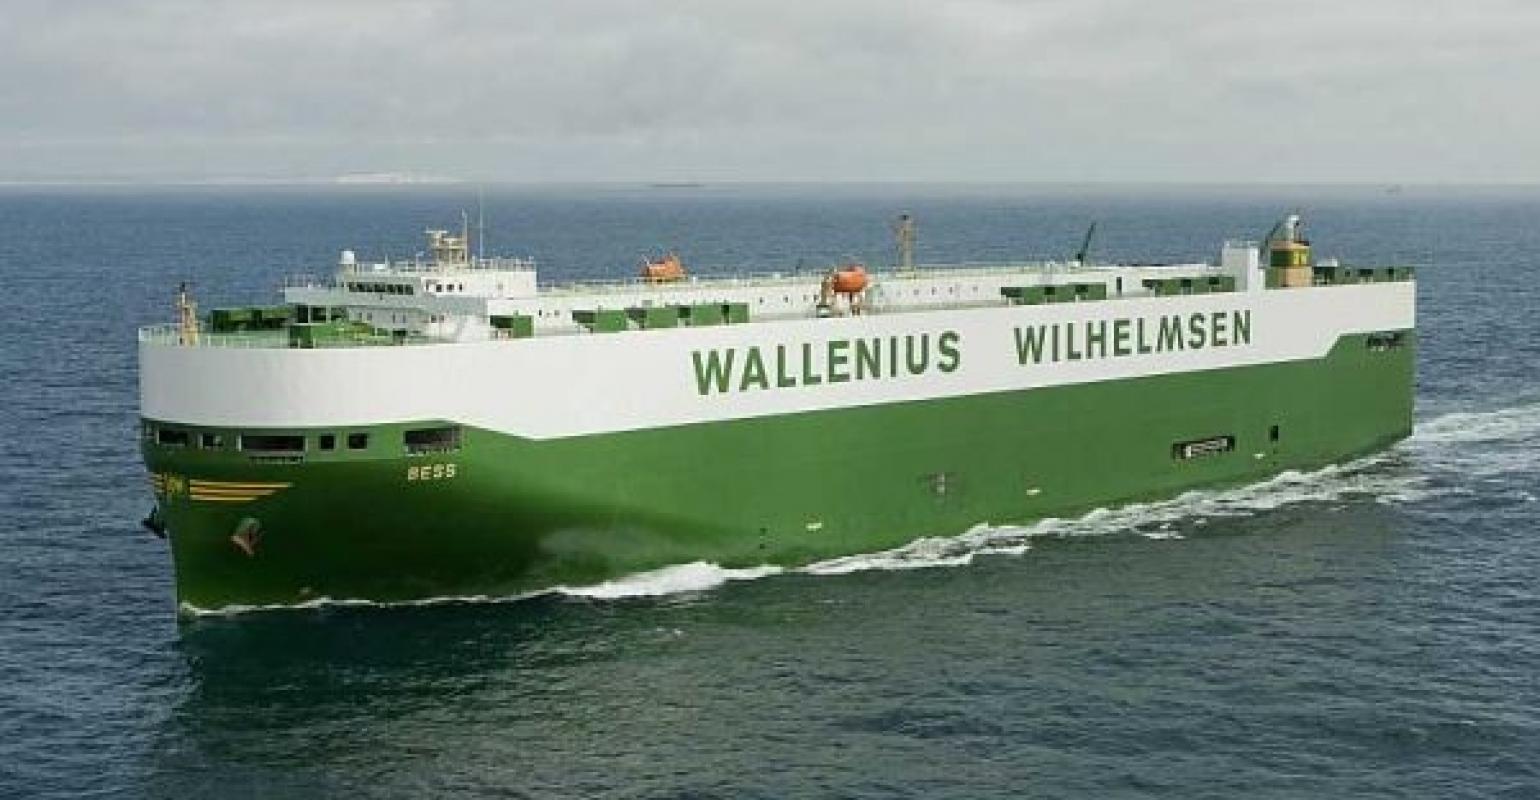 Wallenius Wilhelmsen aims to build wind-powered ships by 2025